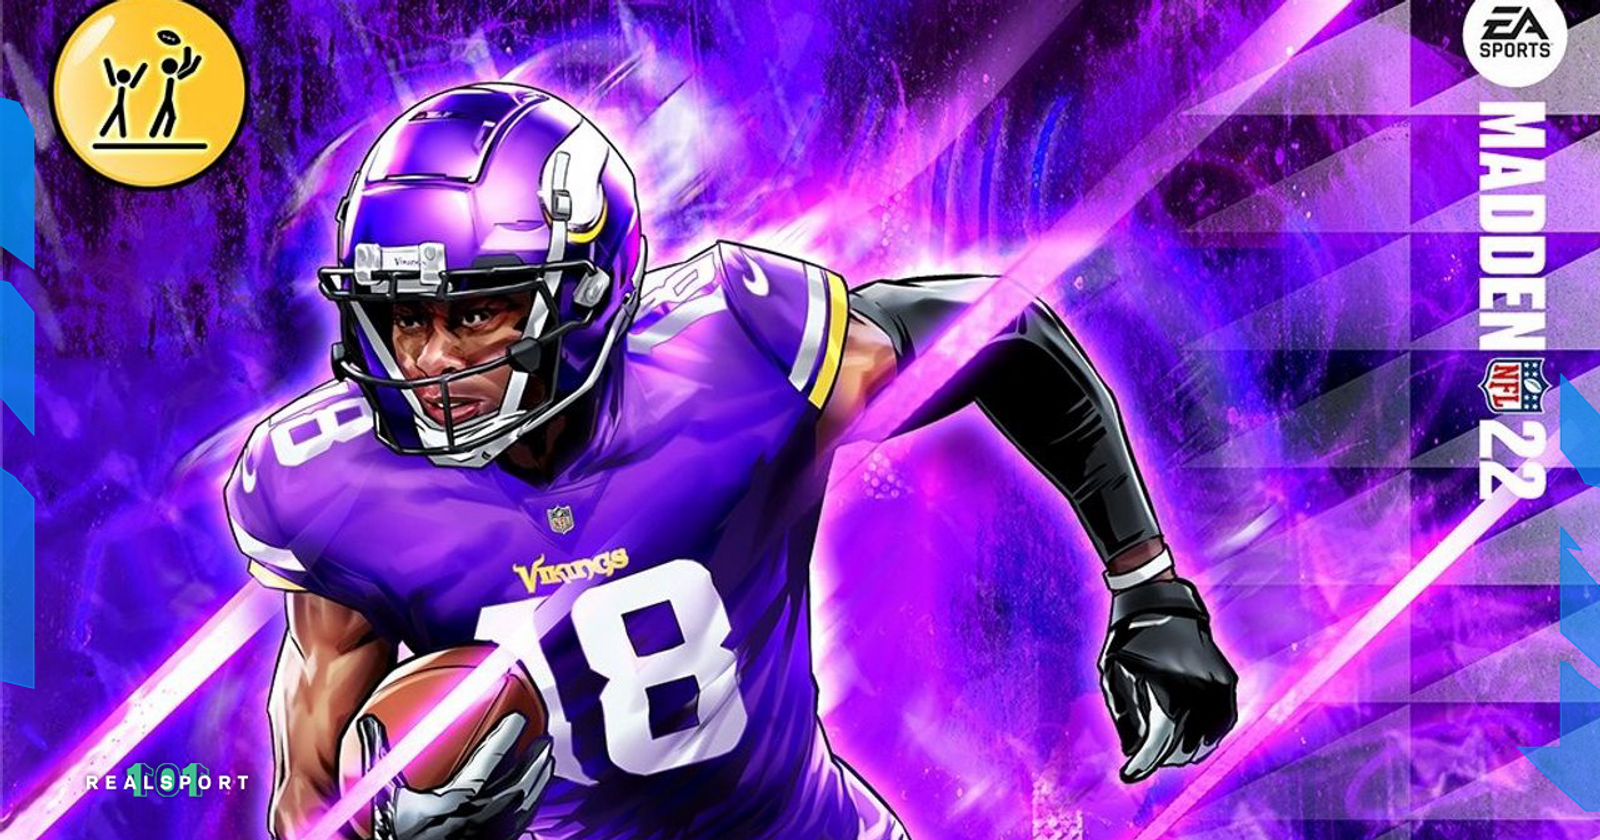 Madden 22 Update 1.012 Patch Notes; Adds New X-Factor Superstars